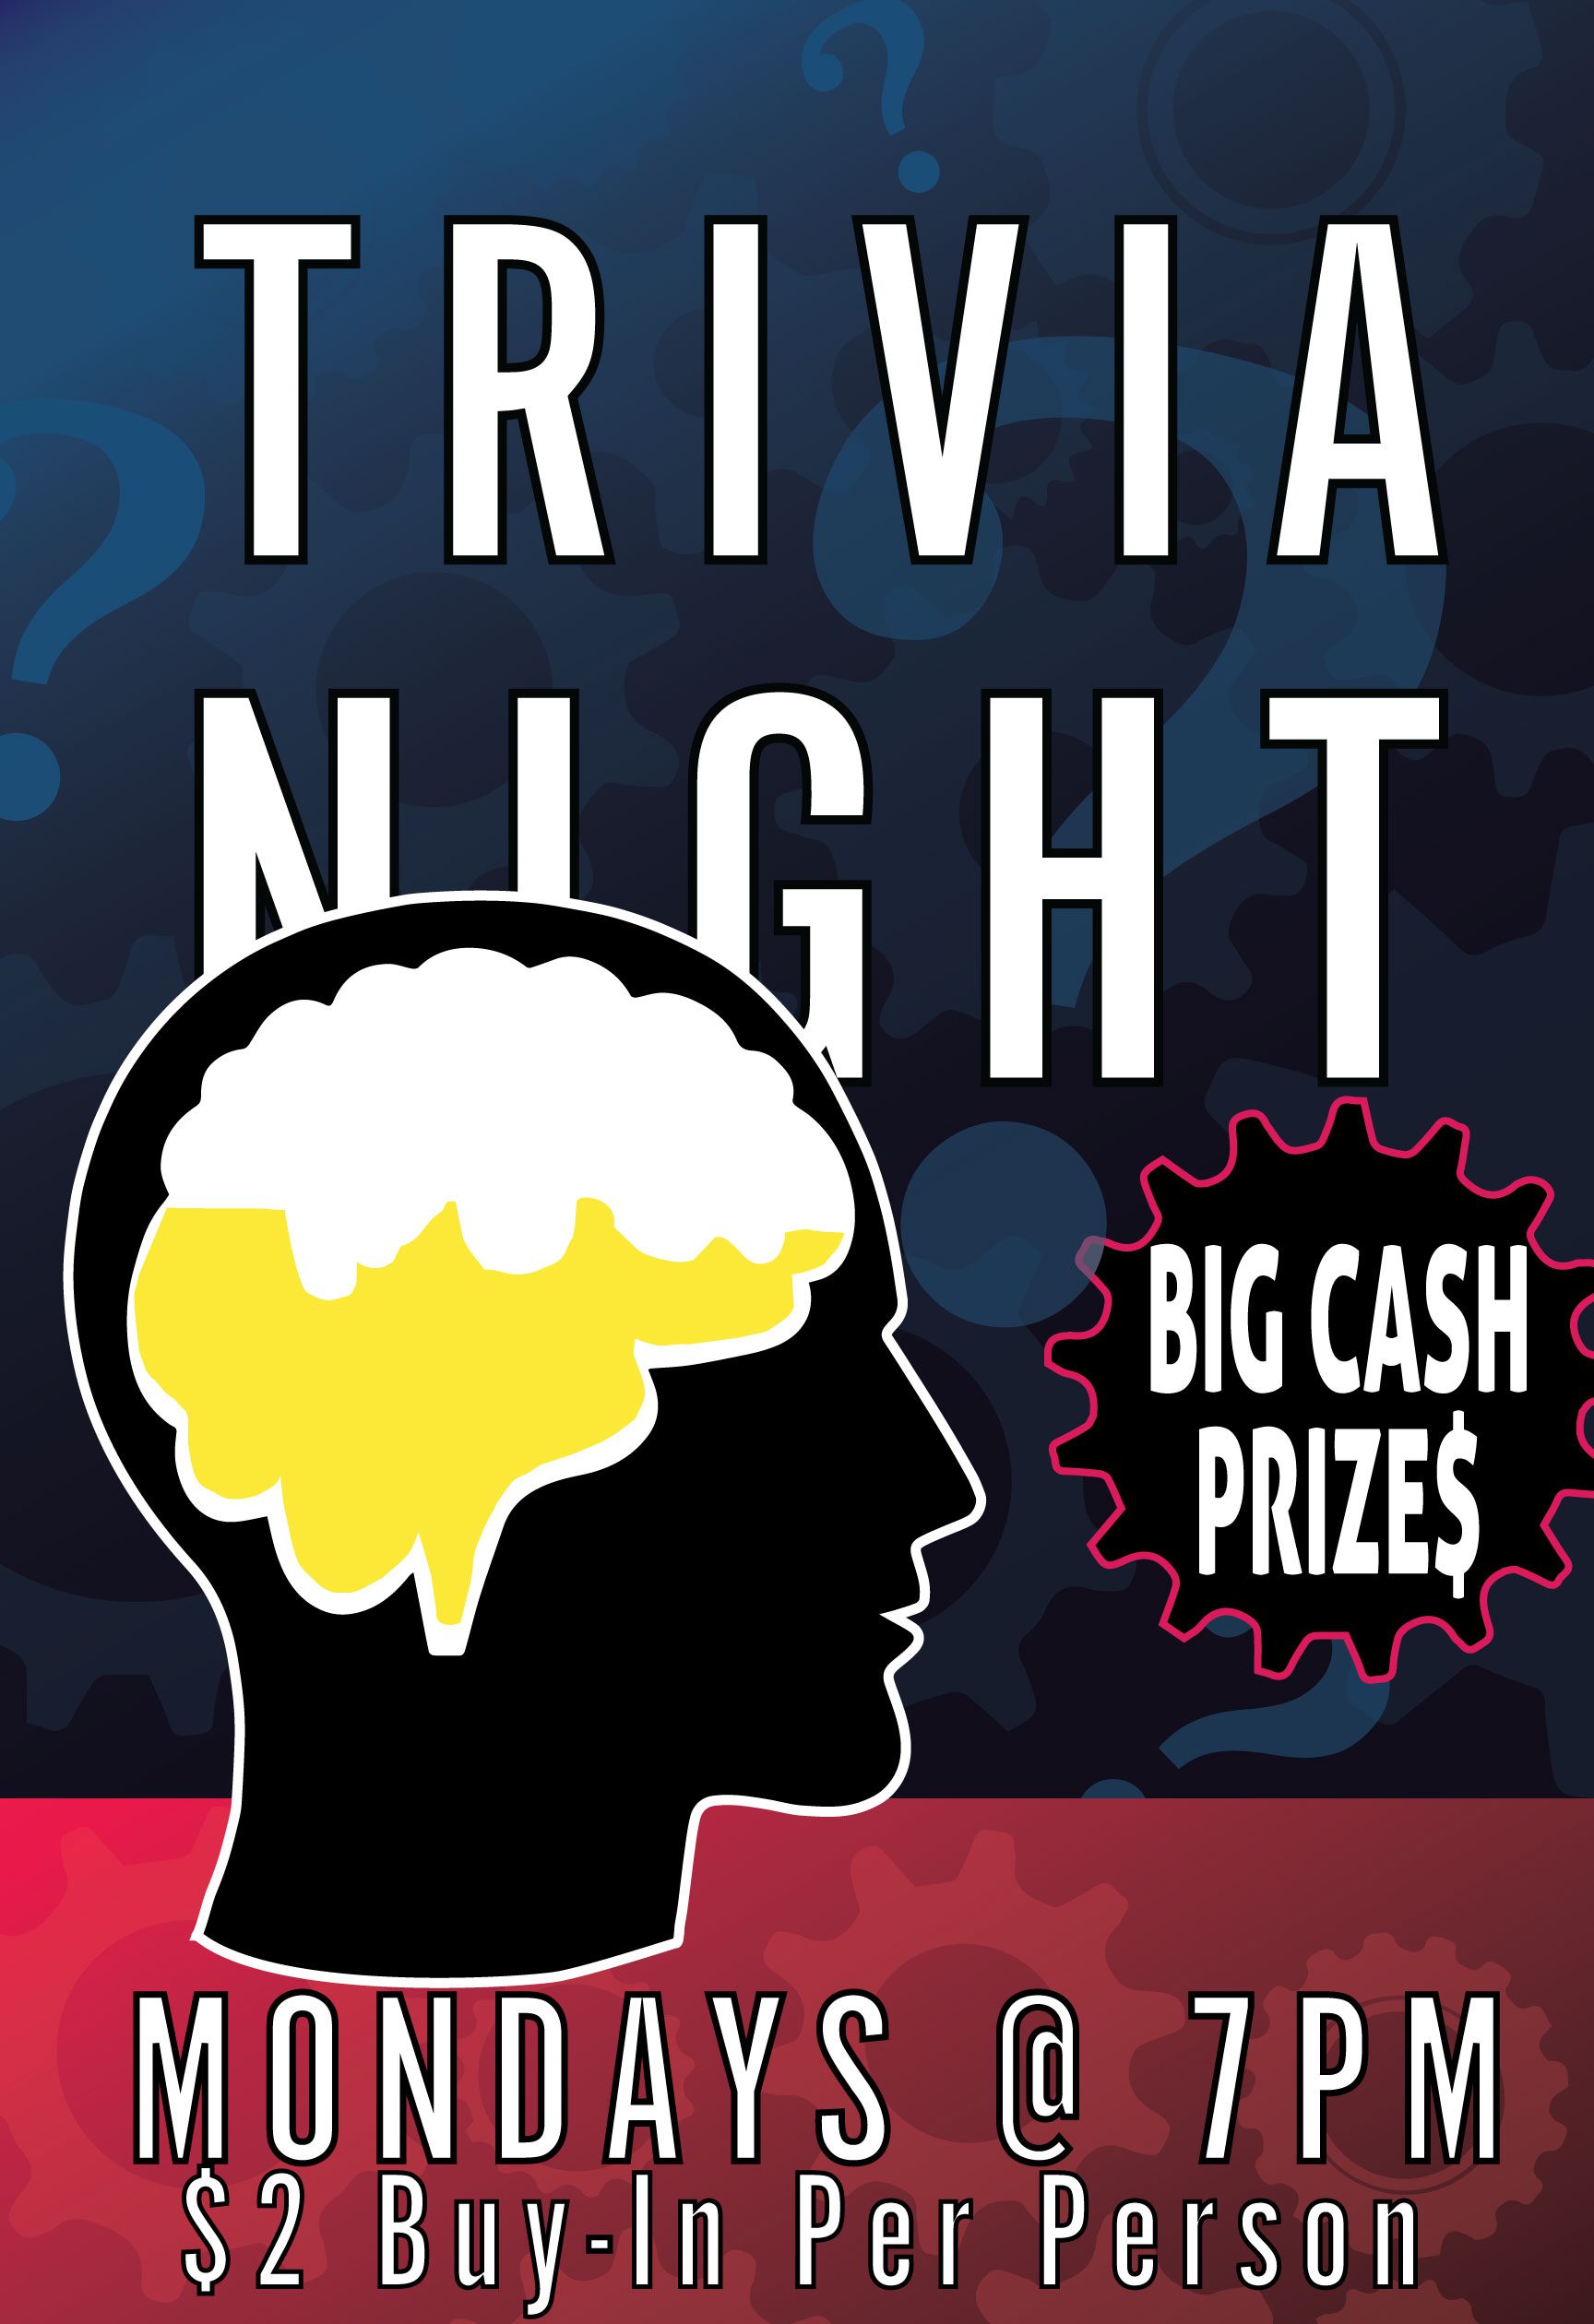 Motorworks Brewing presents Trivia Night every Monday @ 7:00 pm EST - $2 Buy-in per person